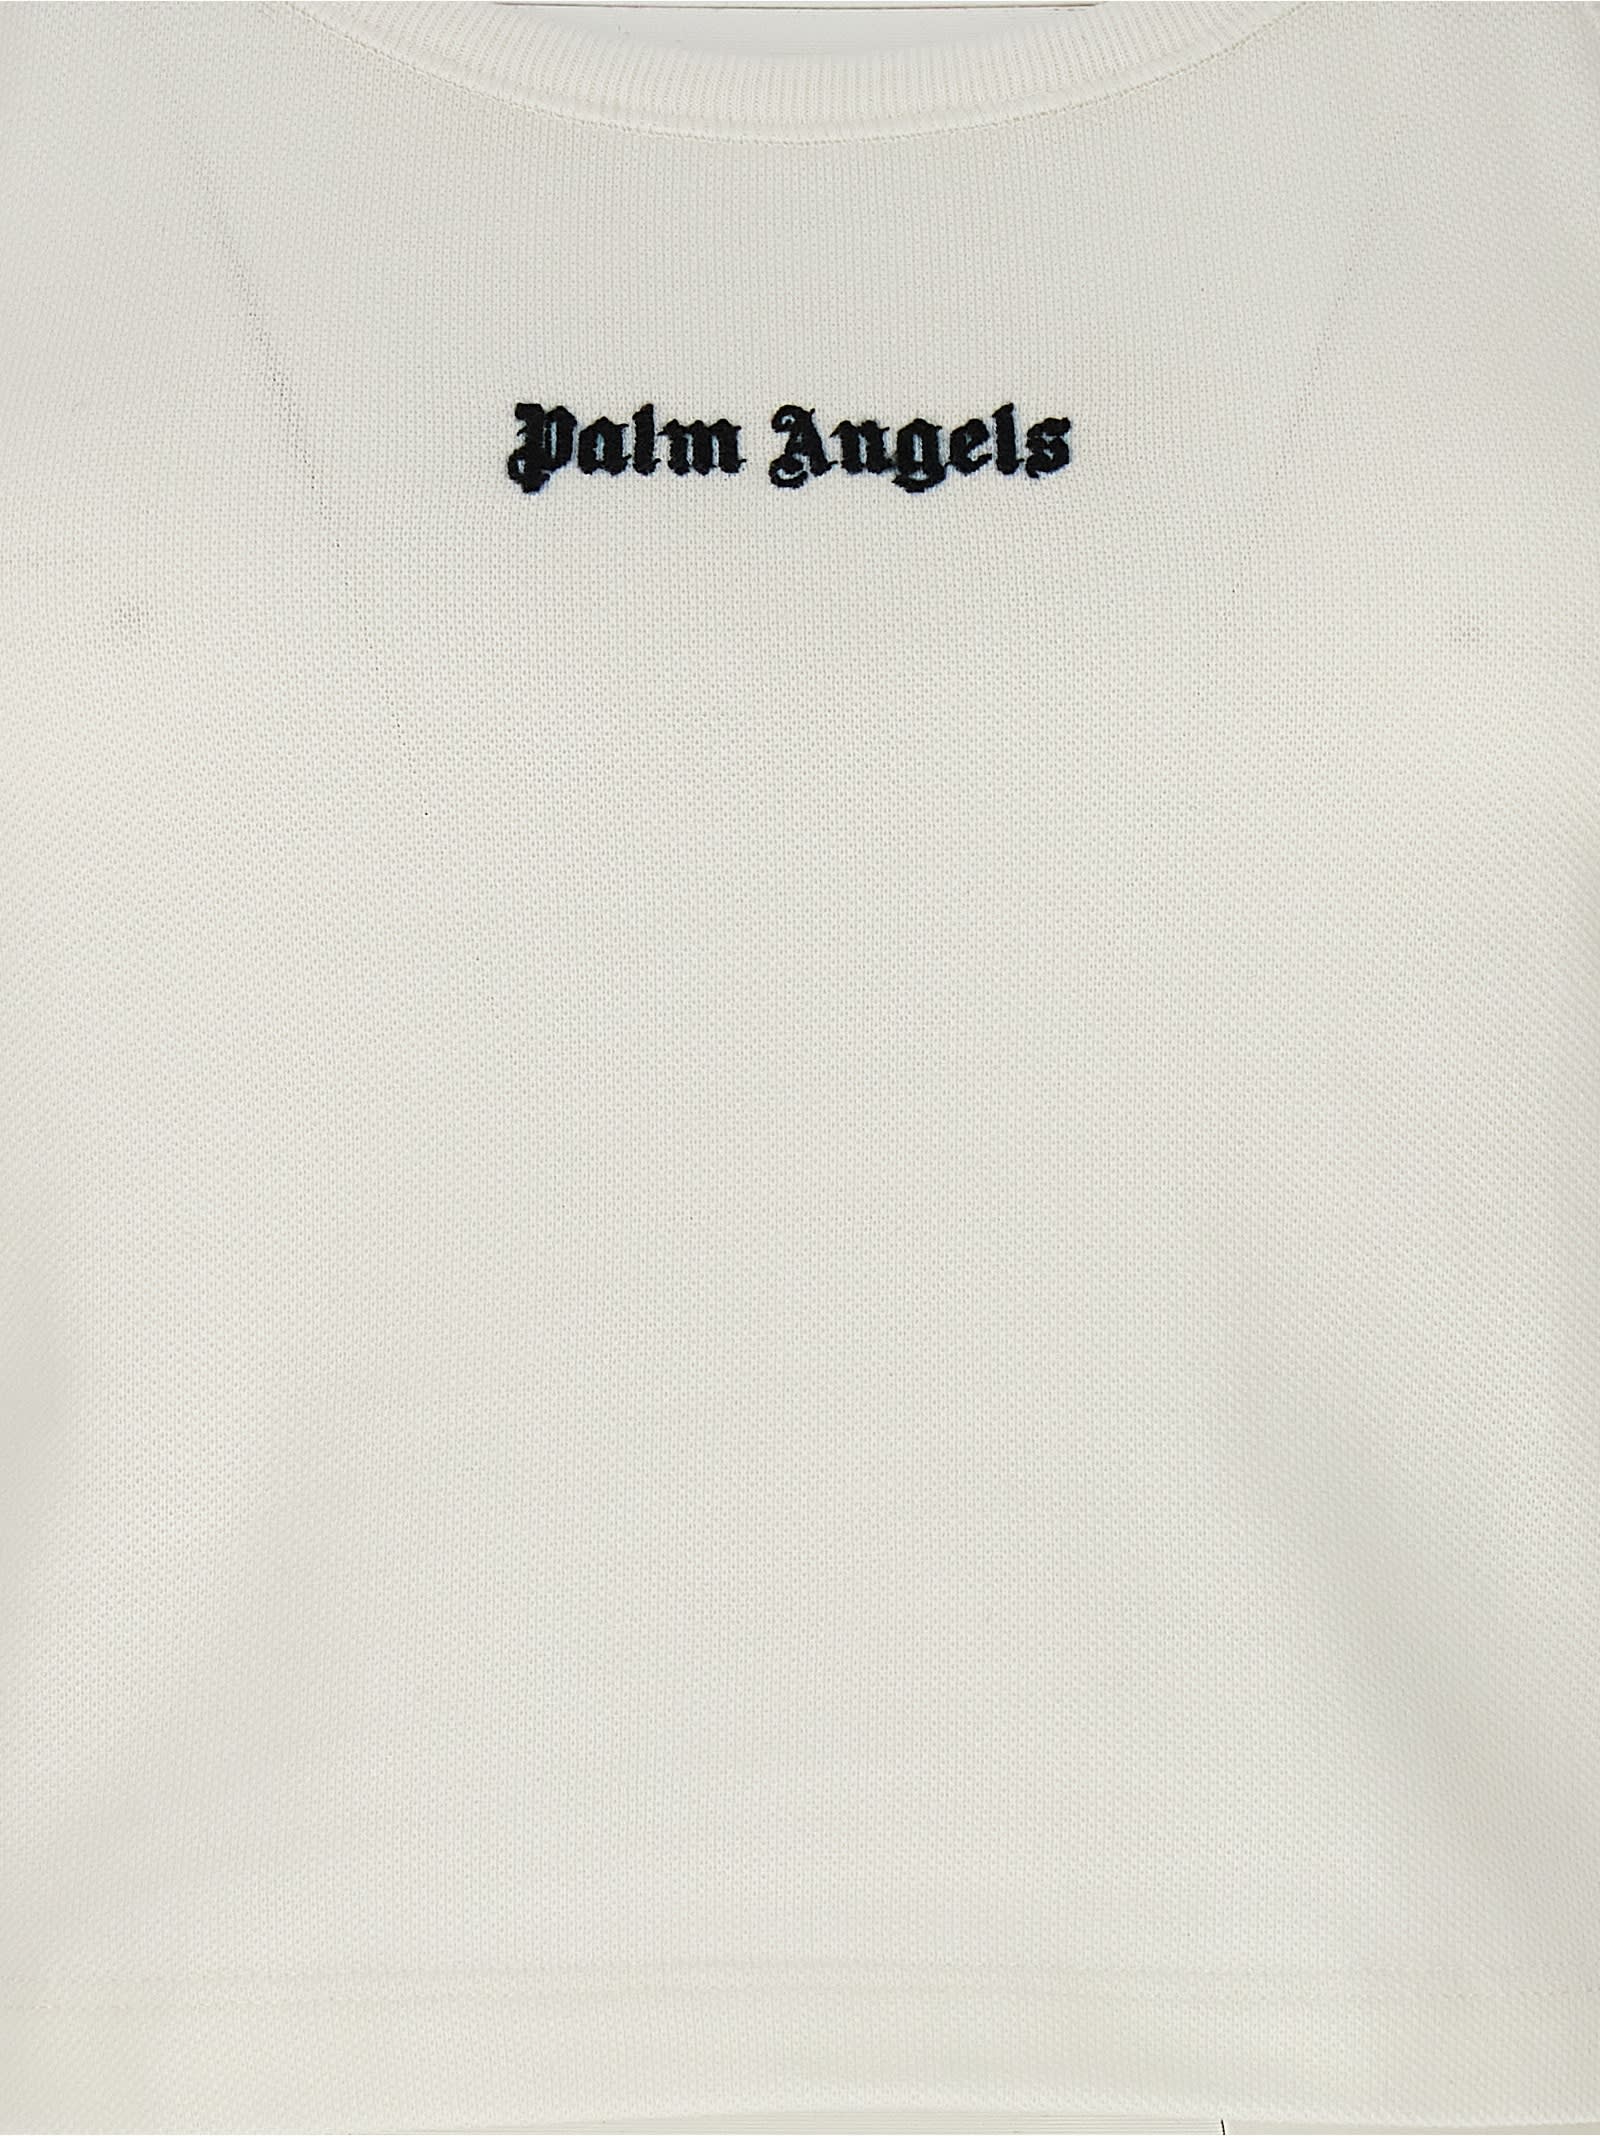 Shop Palm Angels Classic Logo Tank Top In White/black